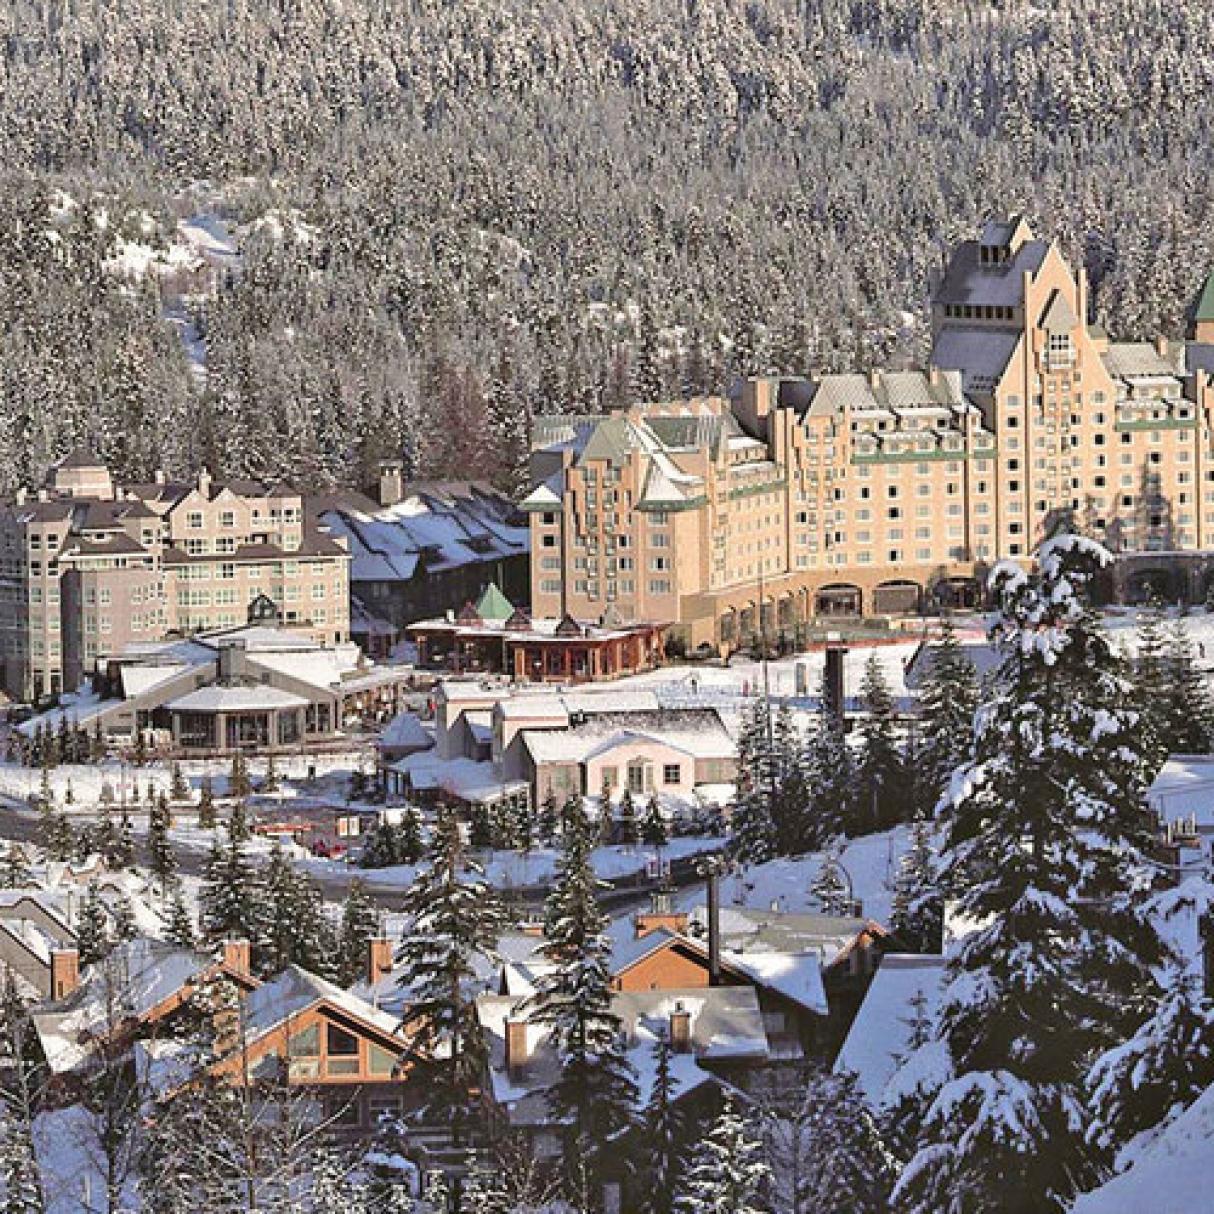 Fairmont Chateau in the wintertime